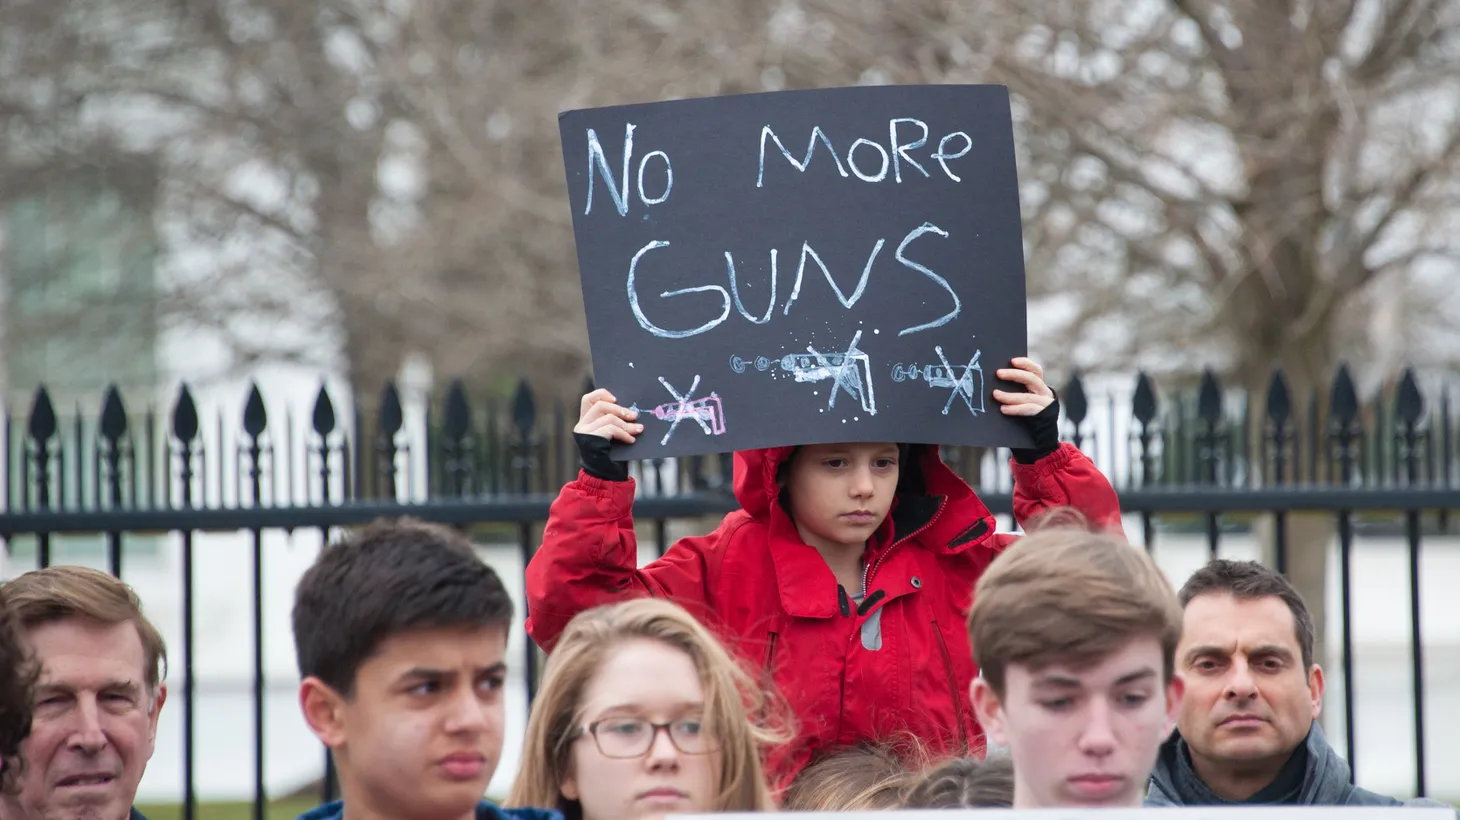 An activist in front of the White House holds a sign that says, “No more guns,” February 19, 2018 in Washington, D.C.